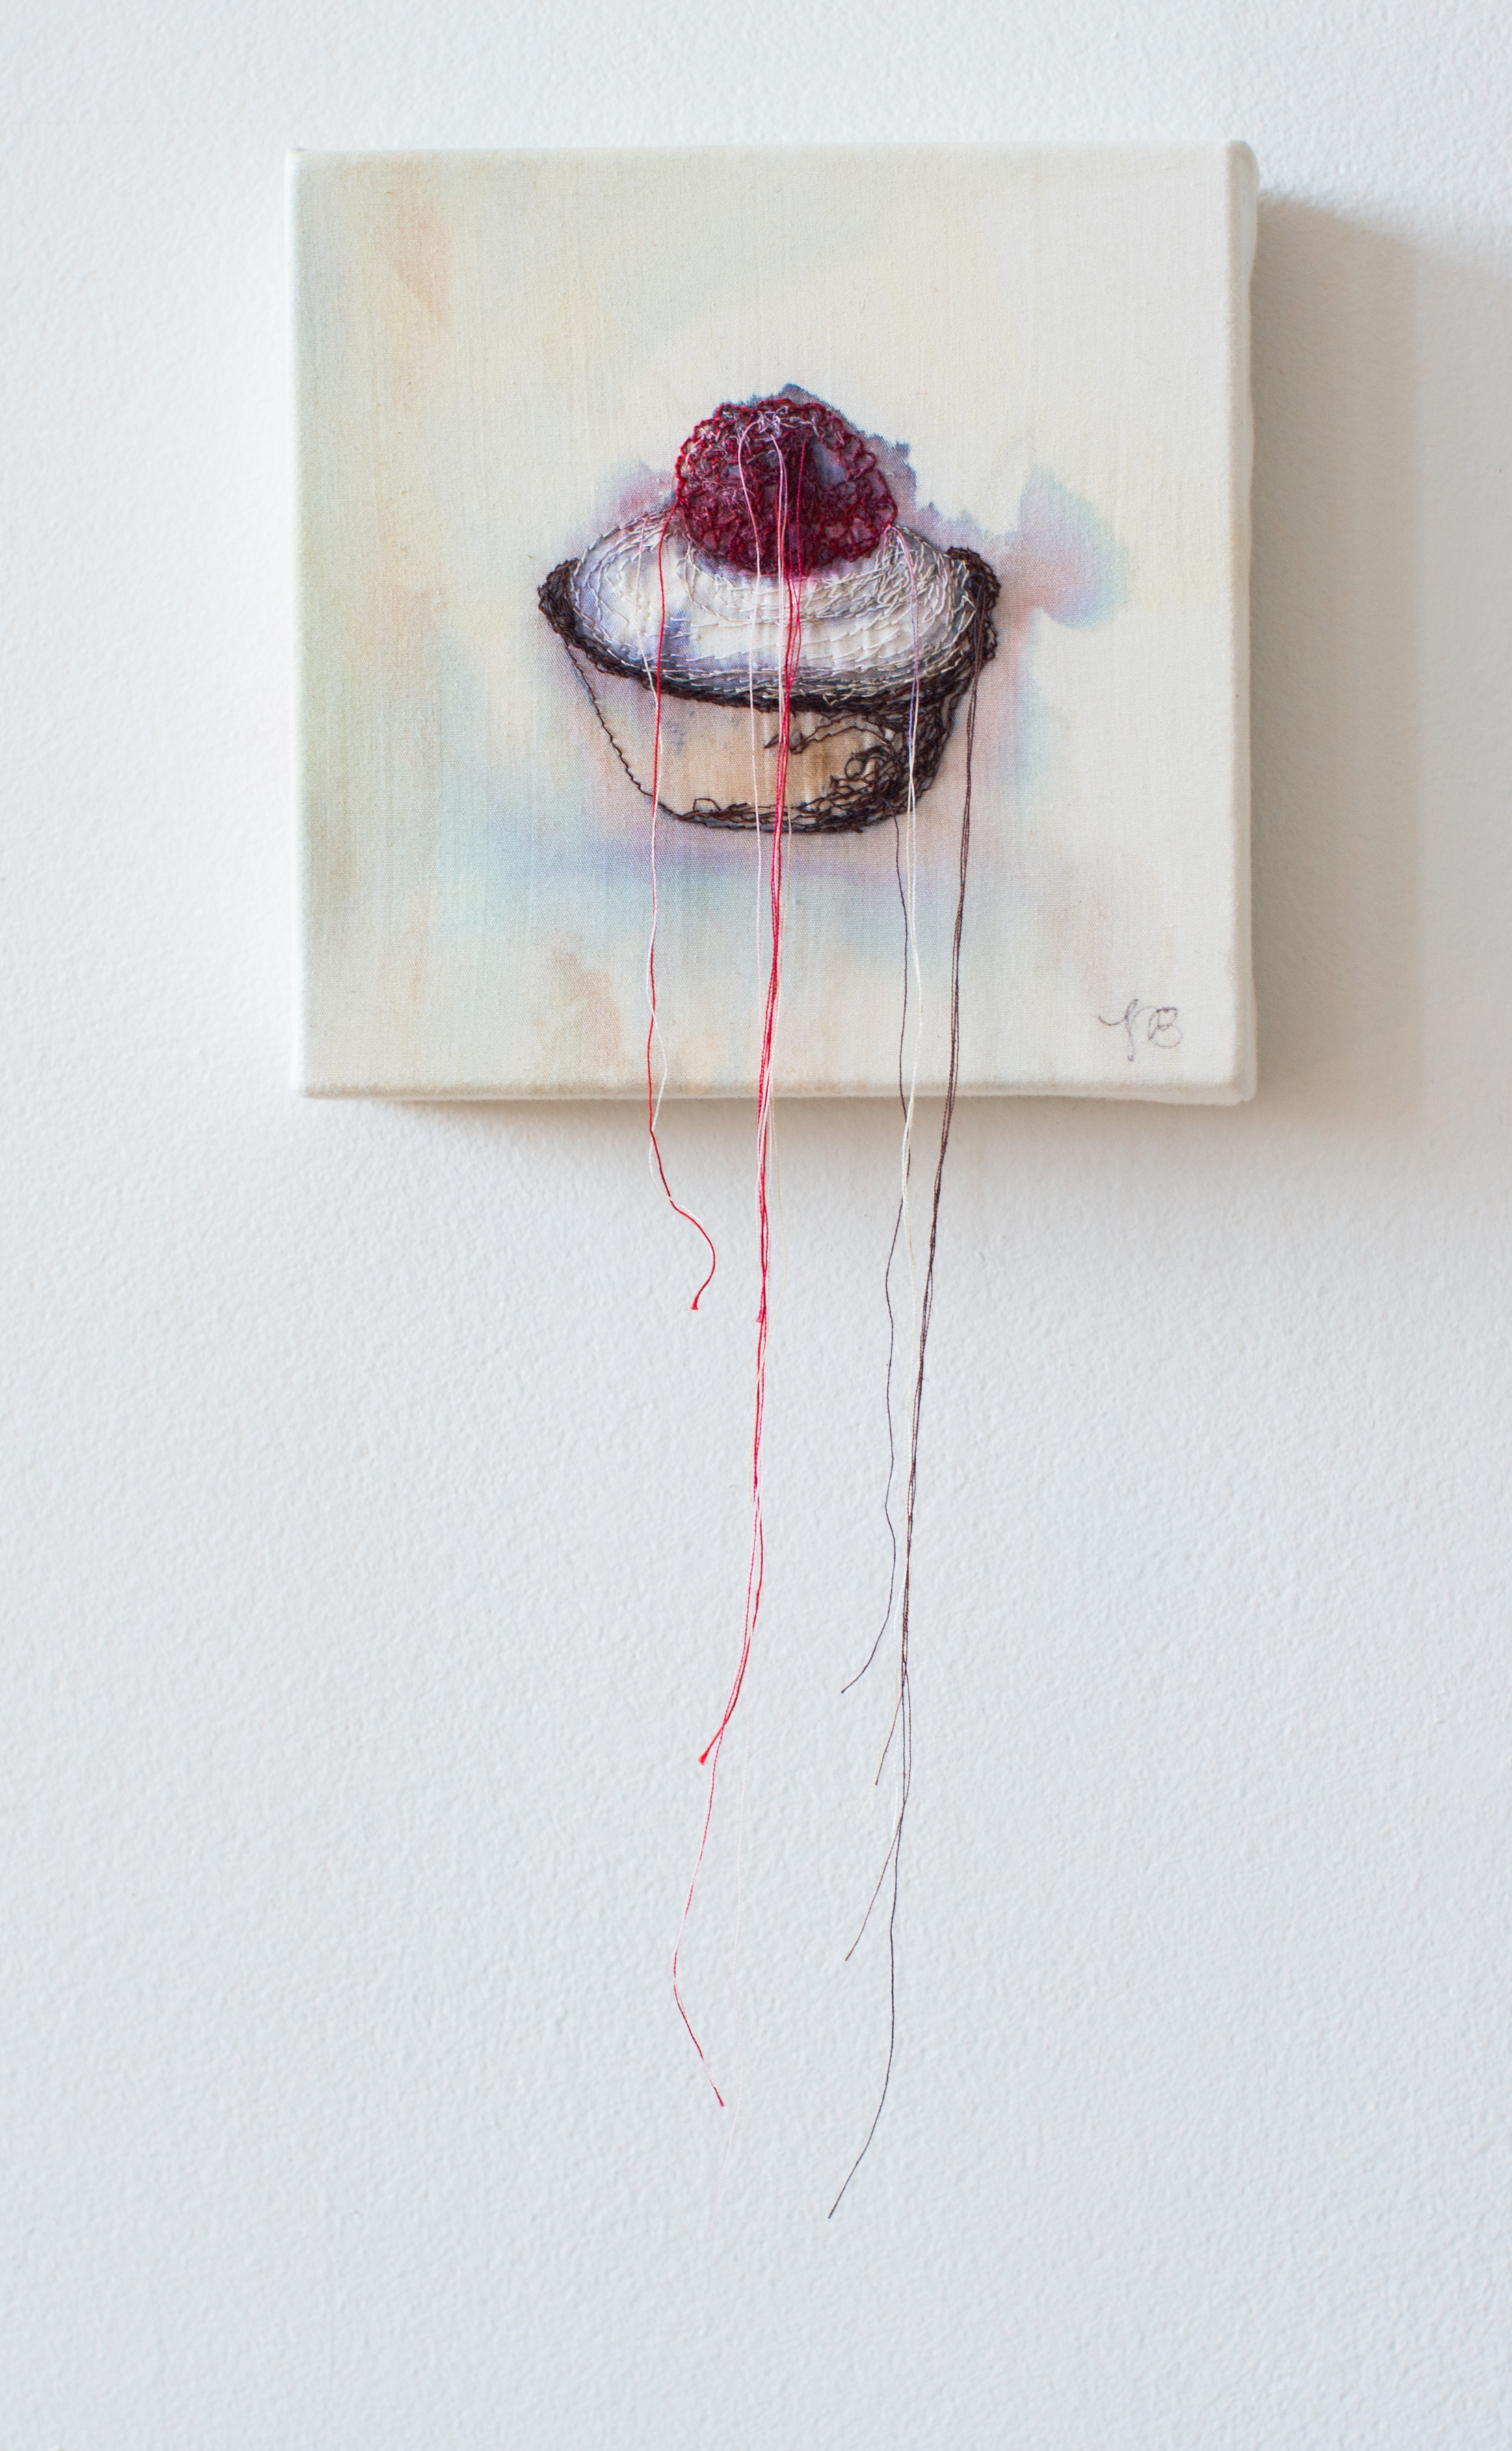   Petit Four avec Framboise   Sewing/ Embroidery with Watercolor and India Ink on Muslin  2013  Photo: Julie Dietz Photography 